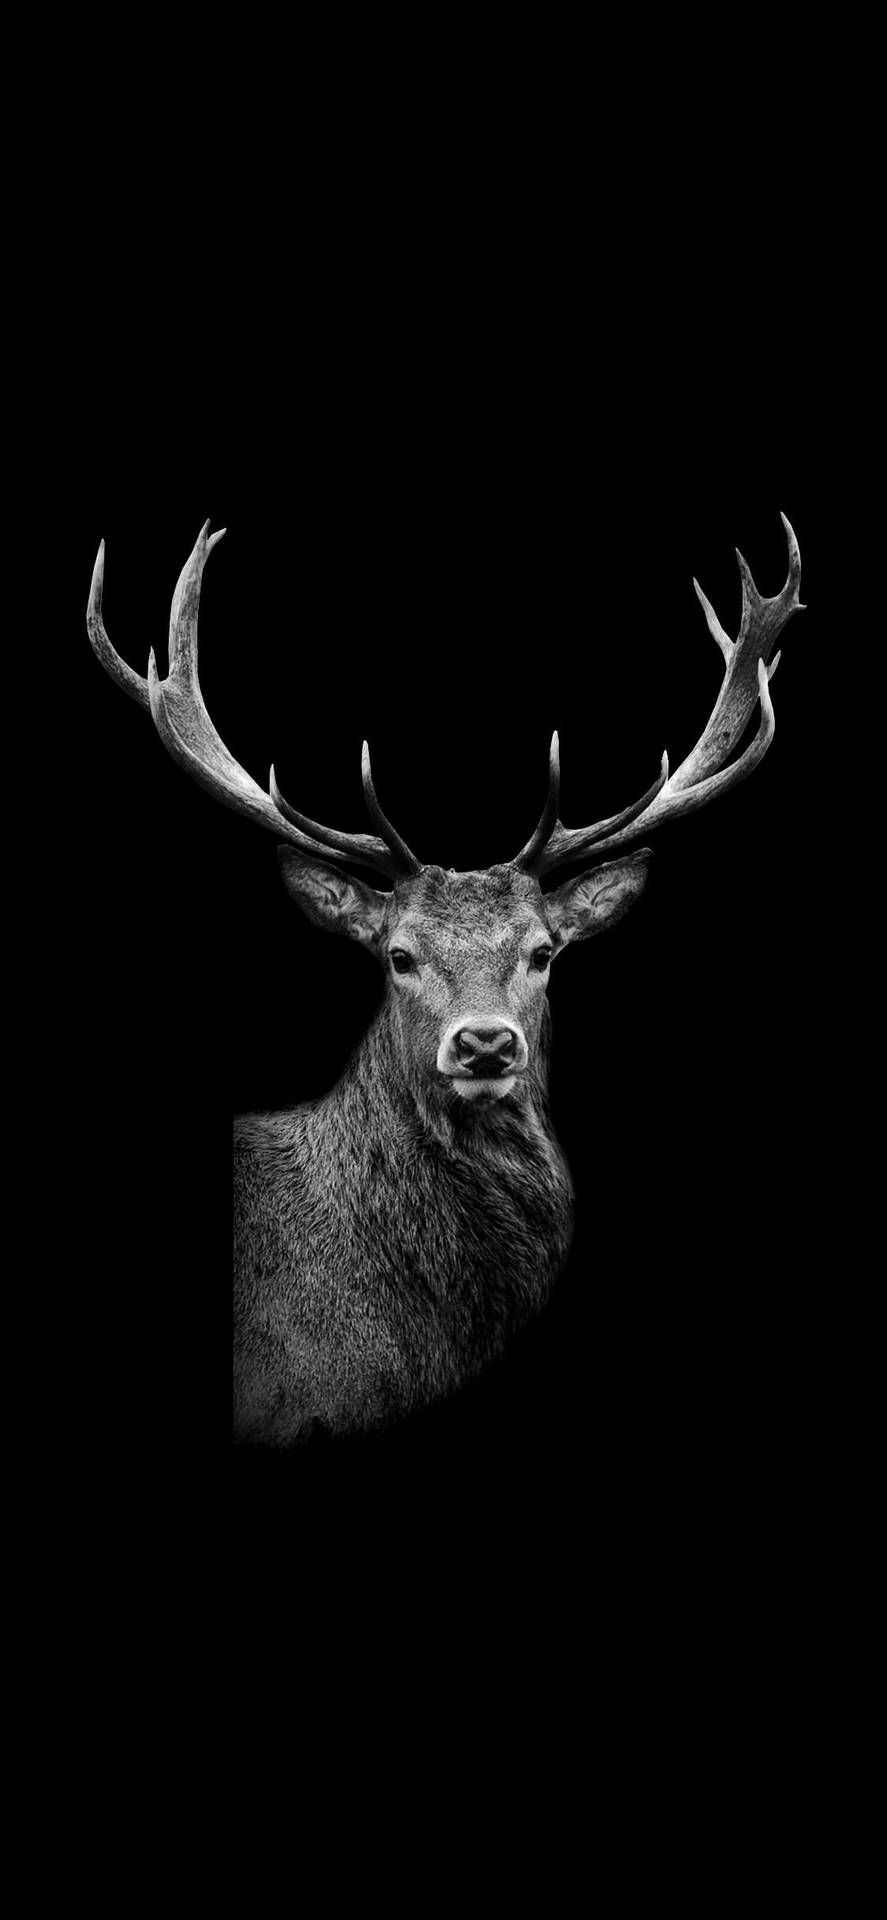 Black and white photo of a deer with antlers on a black background - Deer